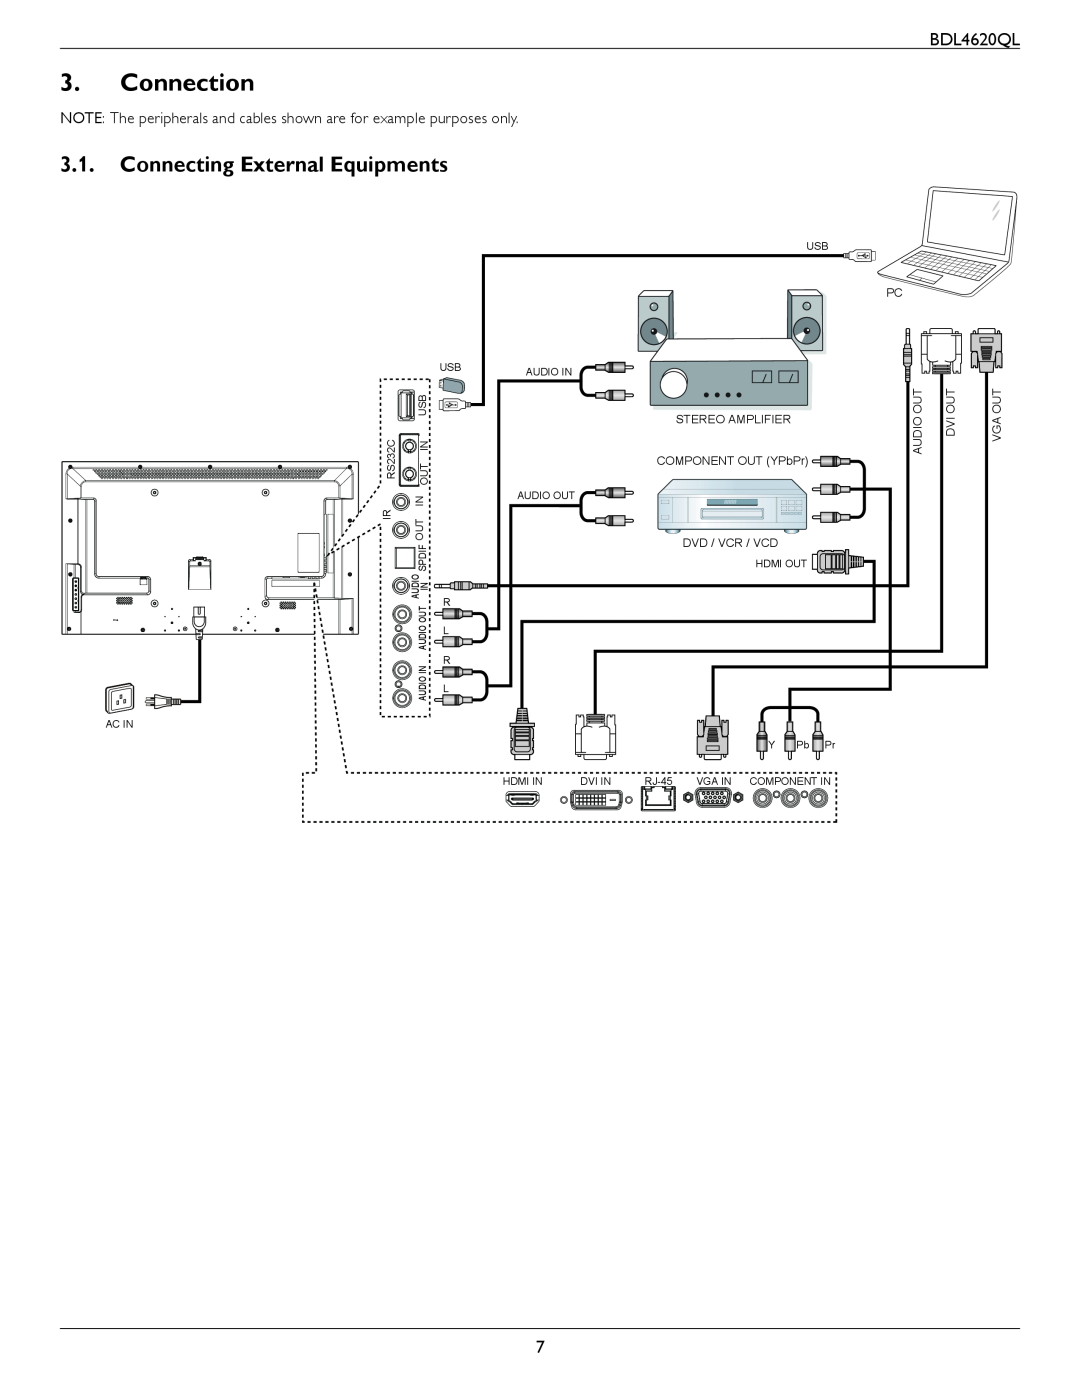 Philips BDL4620QL user manual Connection, Connecting External Equipments, Audio, Dvd / Vcr / Vcd, Vga Out 